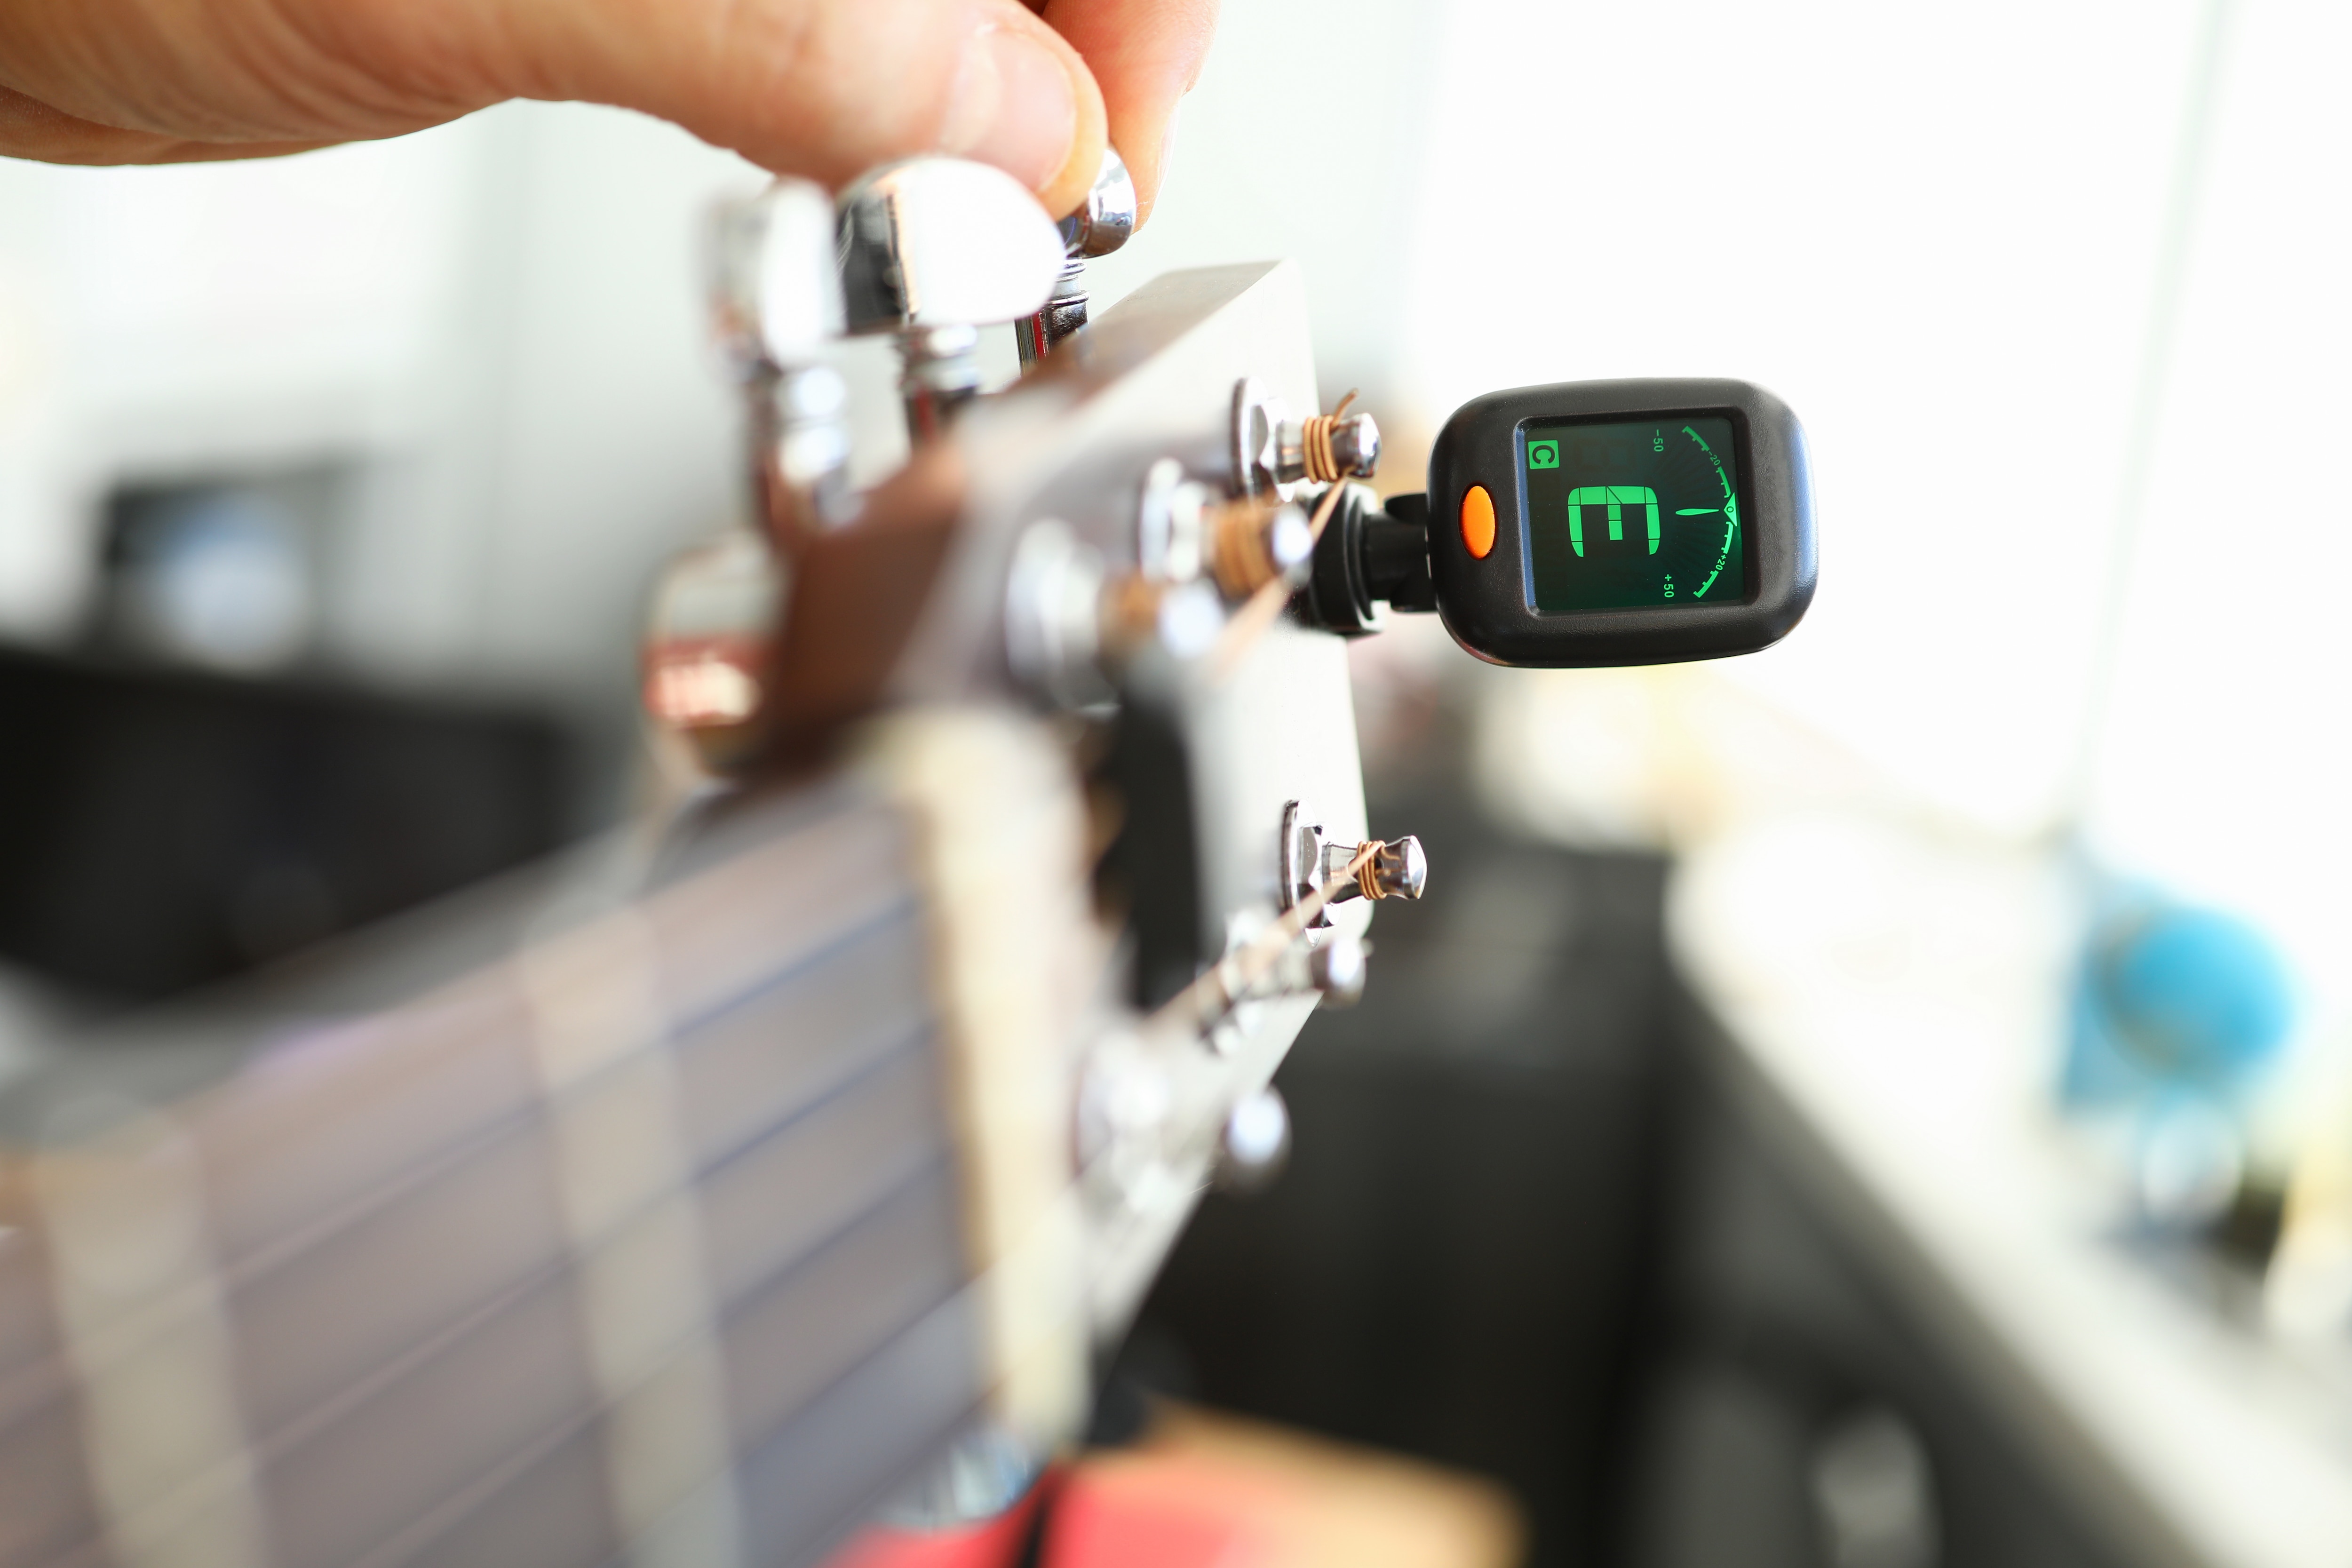 [RS+] Open G Tuning: How To Tune Your Guitar to Open G SEO ARTICLE - What’s the Difference Between Standard Tuning and Open G